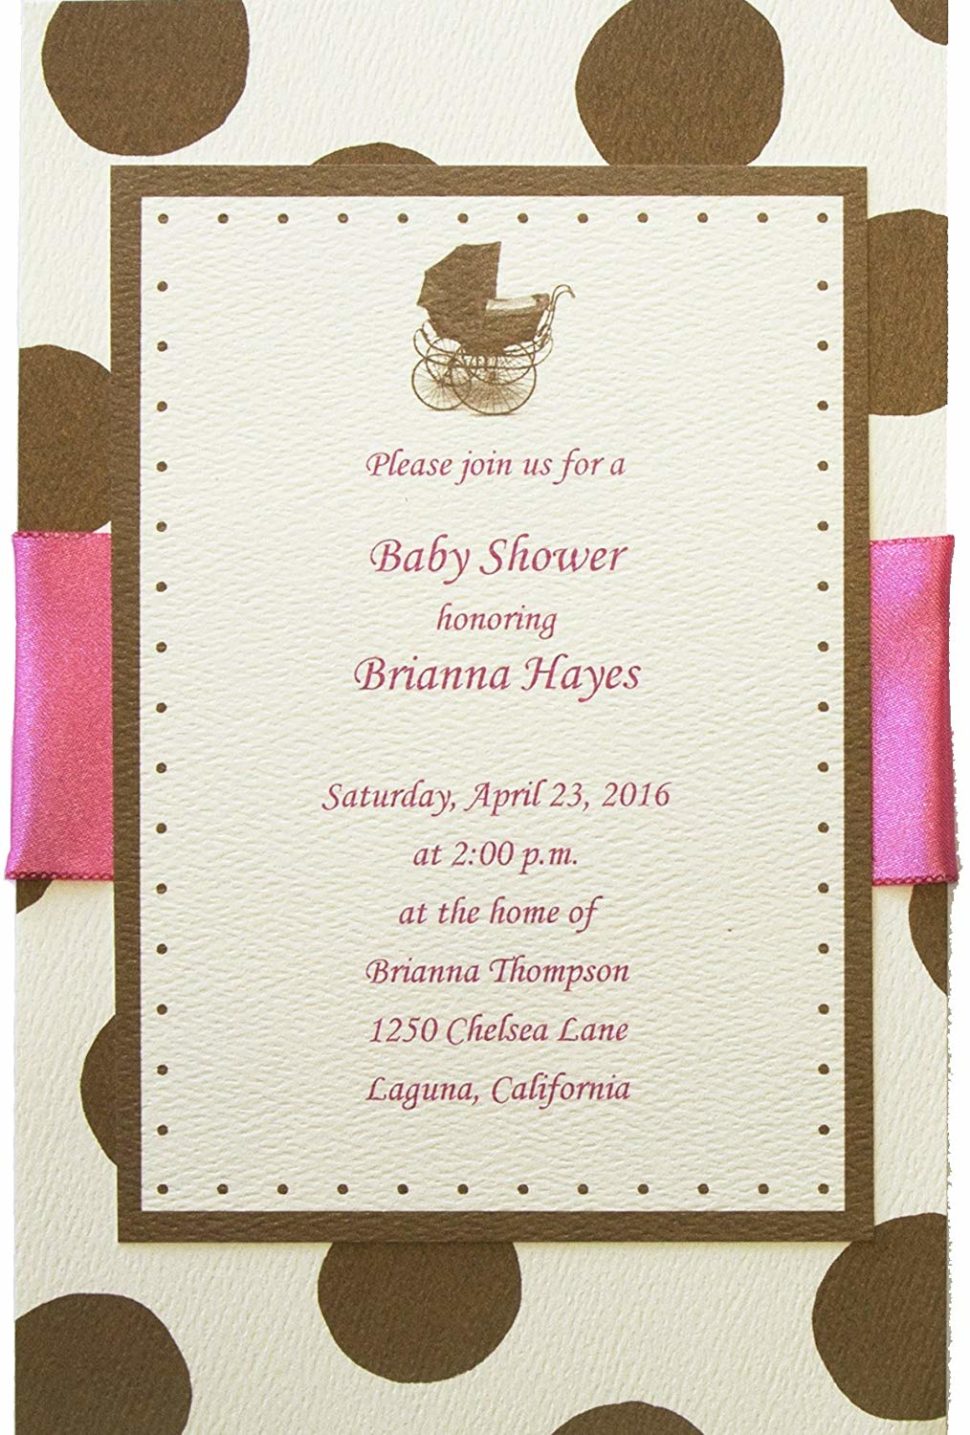 Medium Size of Baby Shower:nautical Baby Shower Invitations For Boys Baby Girl Themes For Bedroom Baby Shower Ideas Baby Shower Decorations Themes For Baby Girl Nursery Nursery For Girls Baby Shower Ideas For Girls Baby Girl Themes For Baby Shower Pinterest Nursery Ideas